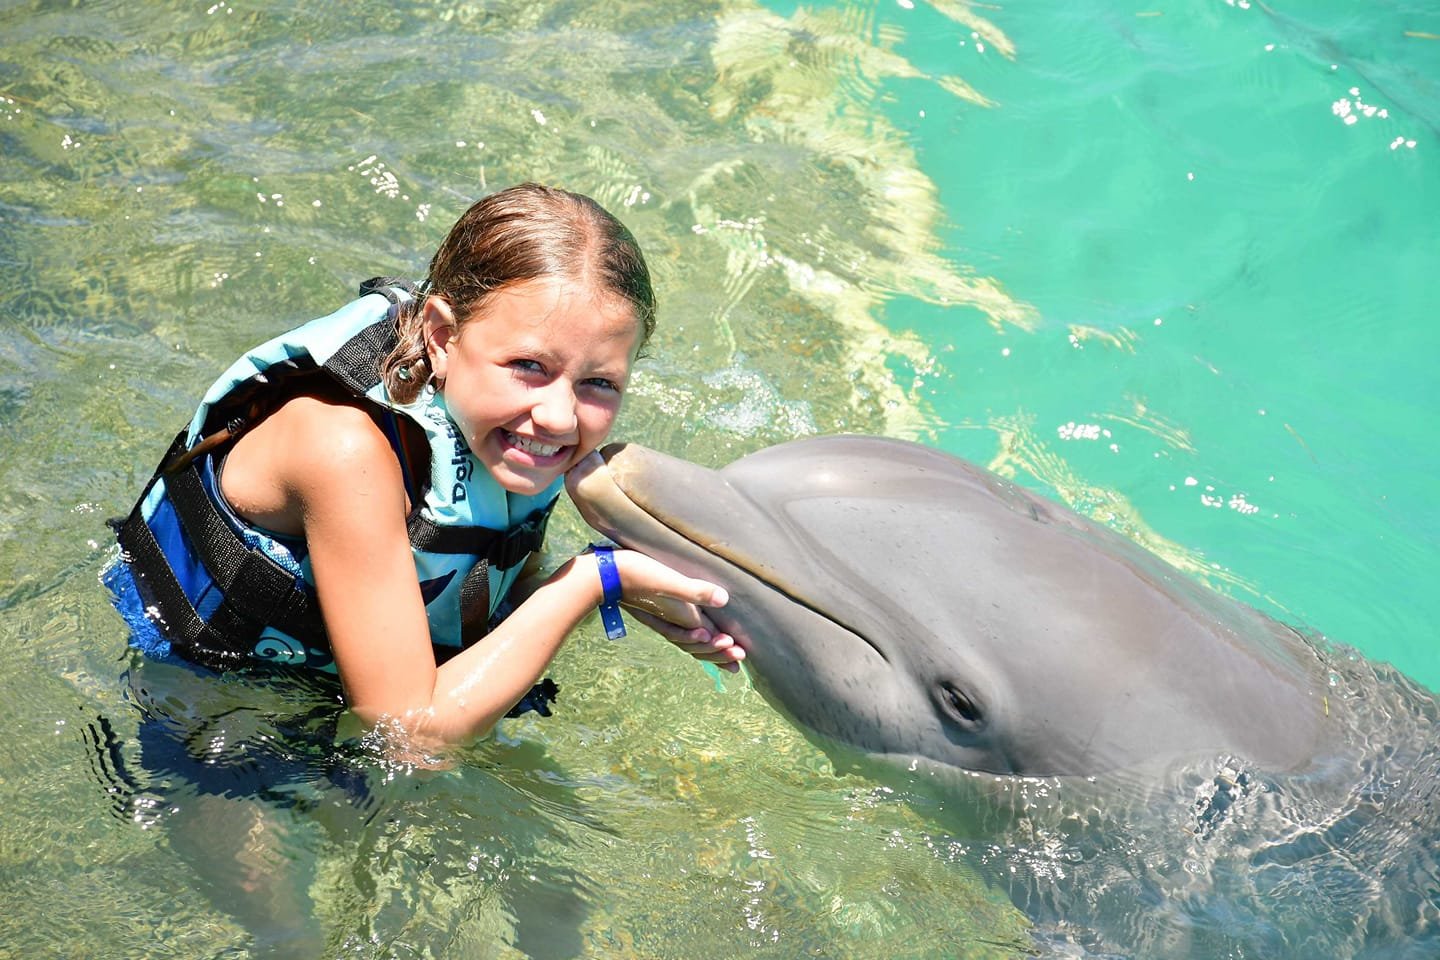 Michelle Sawyers-Ipock and her family spent a week in Isla Mujeres Mexico where they swam with dolphins.